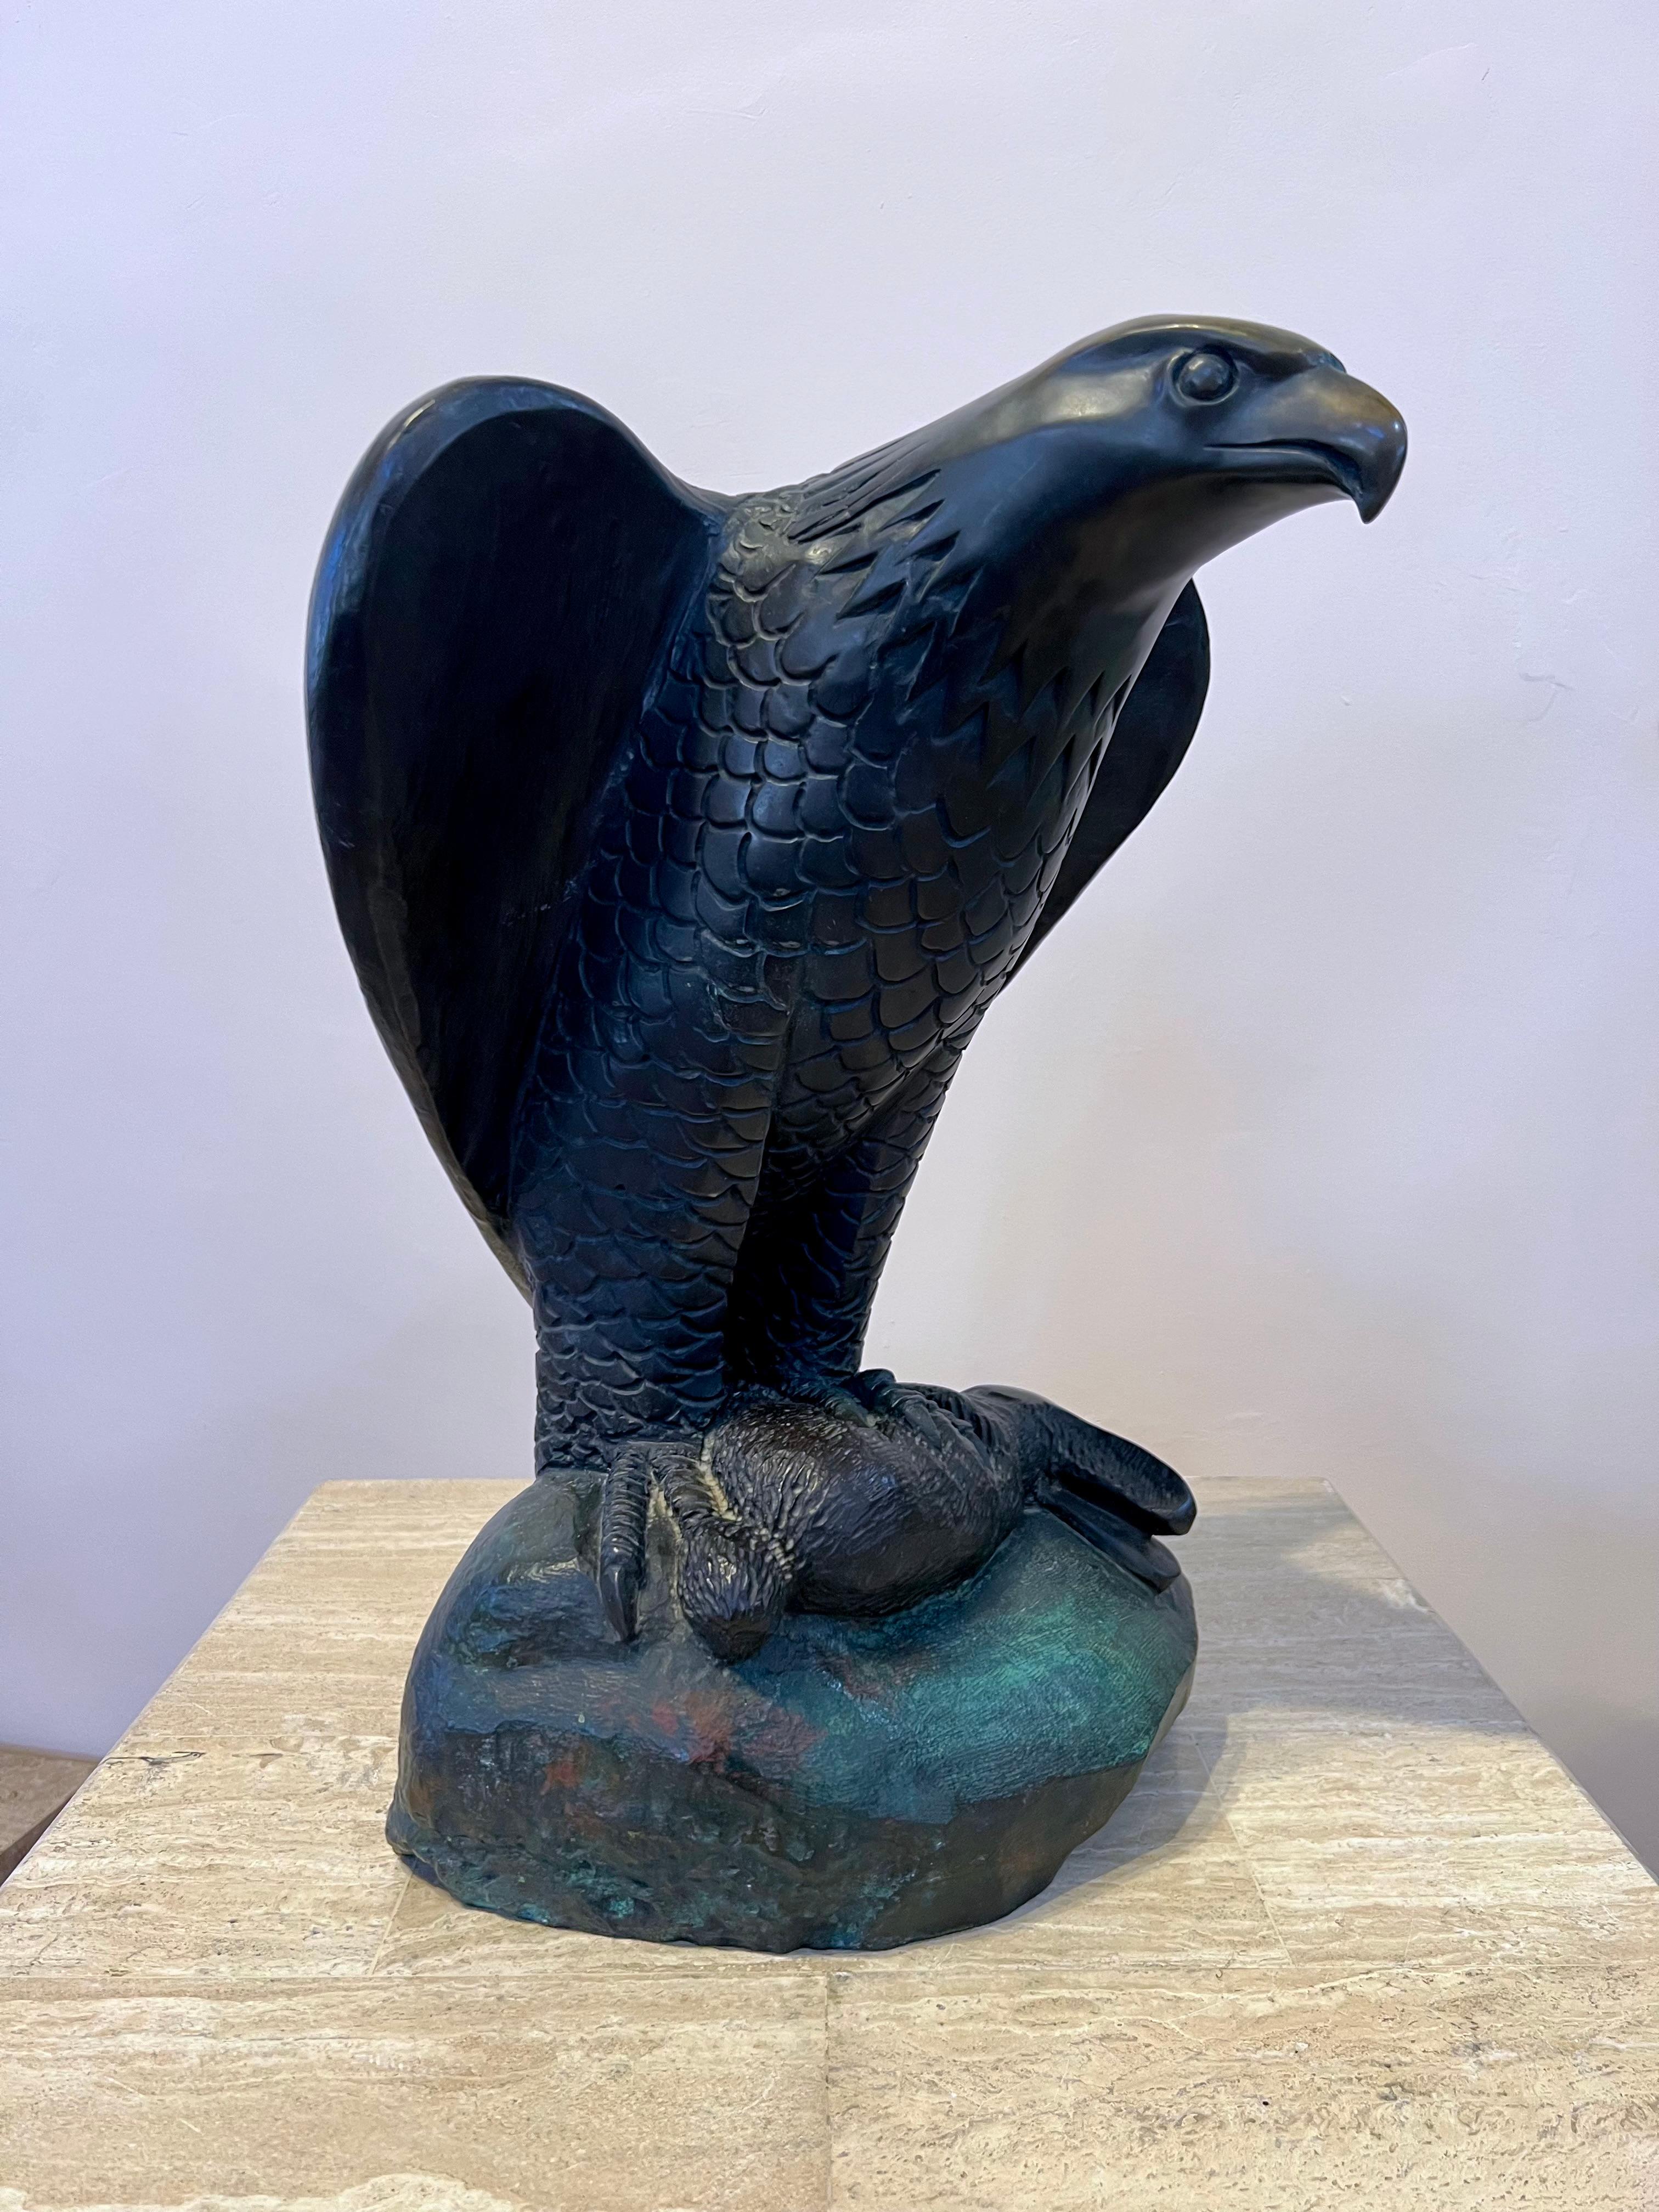 End of the Hunt, by Allan Houser, bronze, sculpture, wildlife, eagle, rabbit

Allan Houser (Haozous), Chiricahua Apache (1914-1994) 

Selected Collections 
Centre Georges Pompidou, Paris, France * “They’re Coming”, bronze  
Dahlem Museum, Berlin,